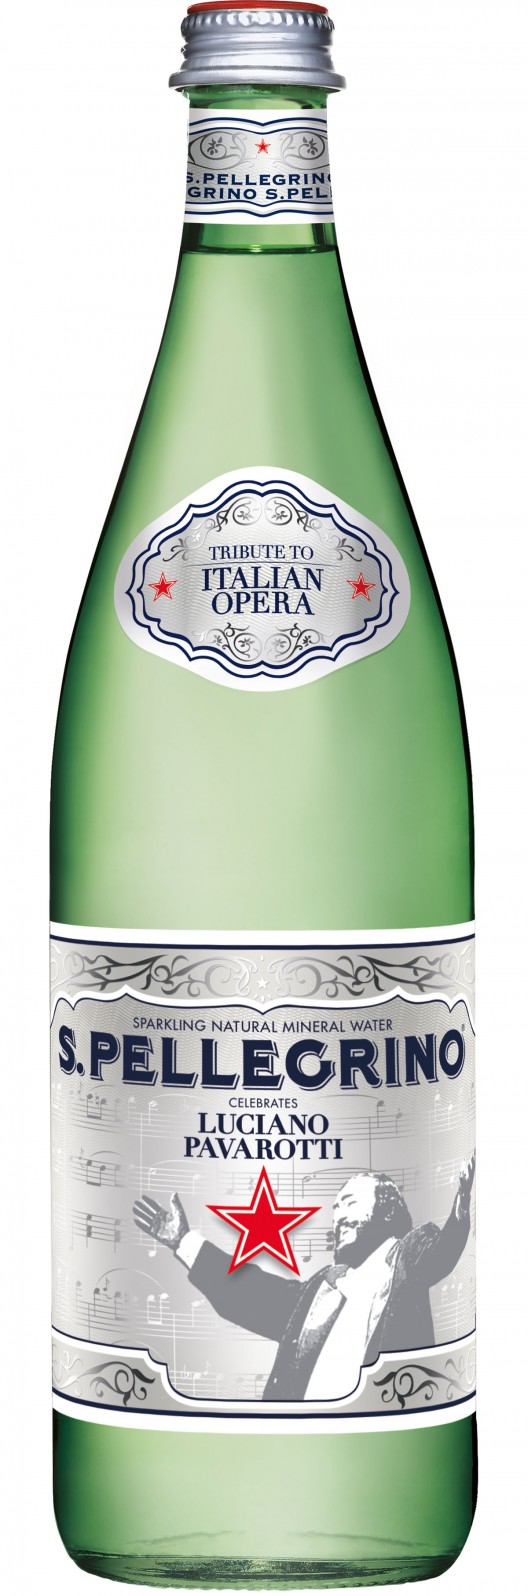 S.Pellegrino has partnered with the Luciano Pavarotti Foundation to create a limited edition Pavarotti sparkling mineral water as a tribute to the unforgettable Maestro